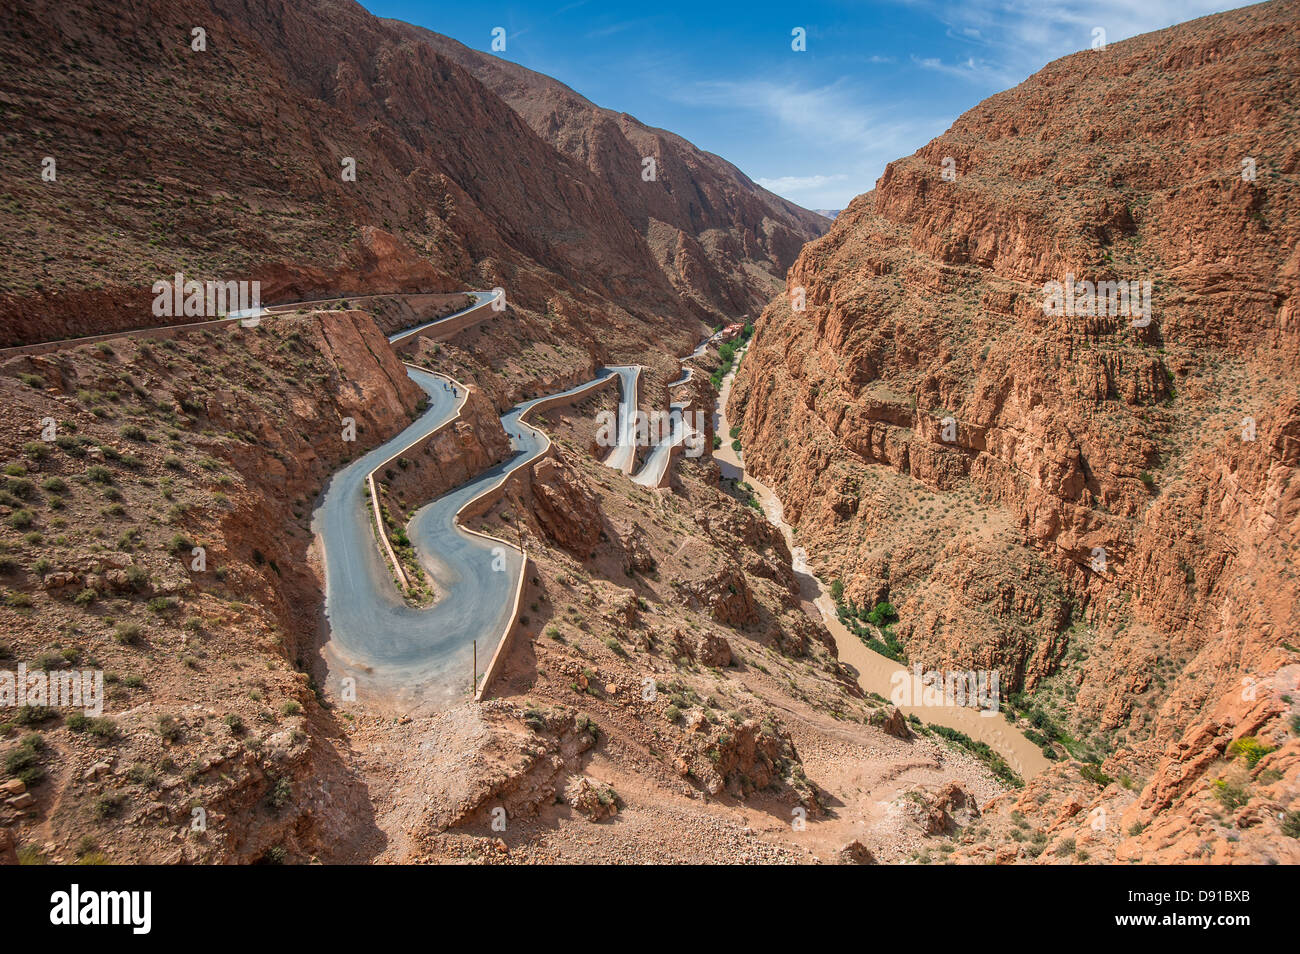 Winding road in Dades gorge, Morocco Stock Photo